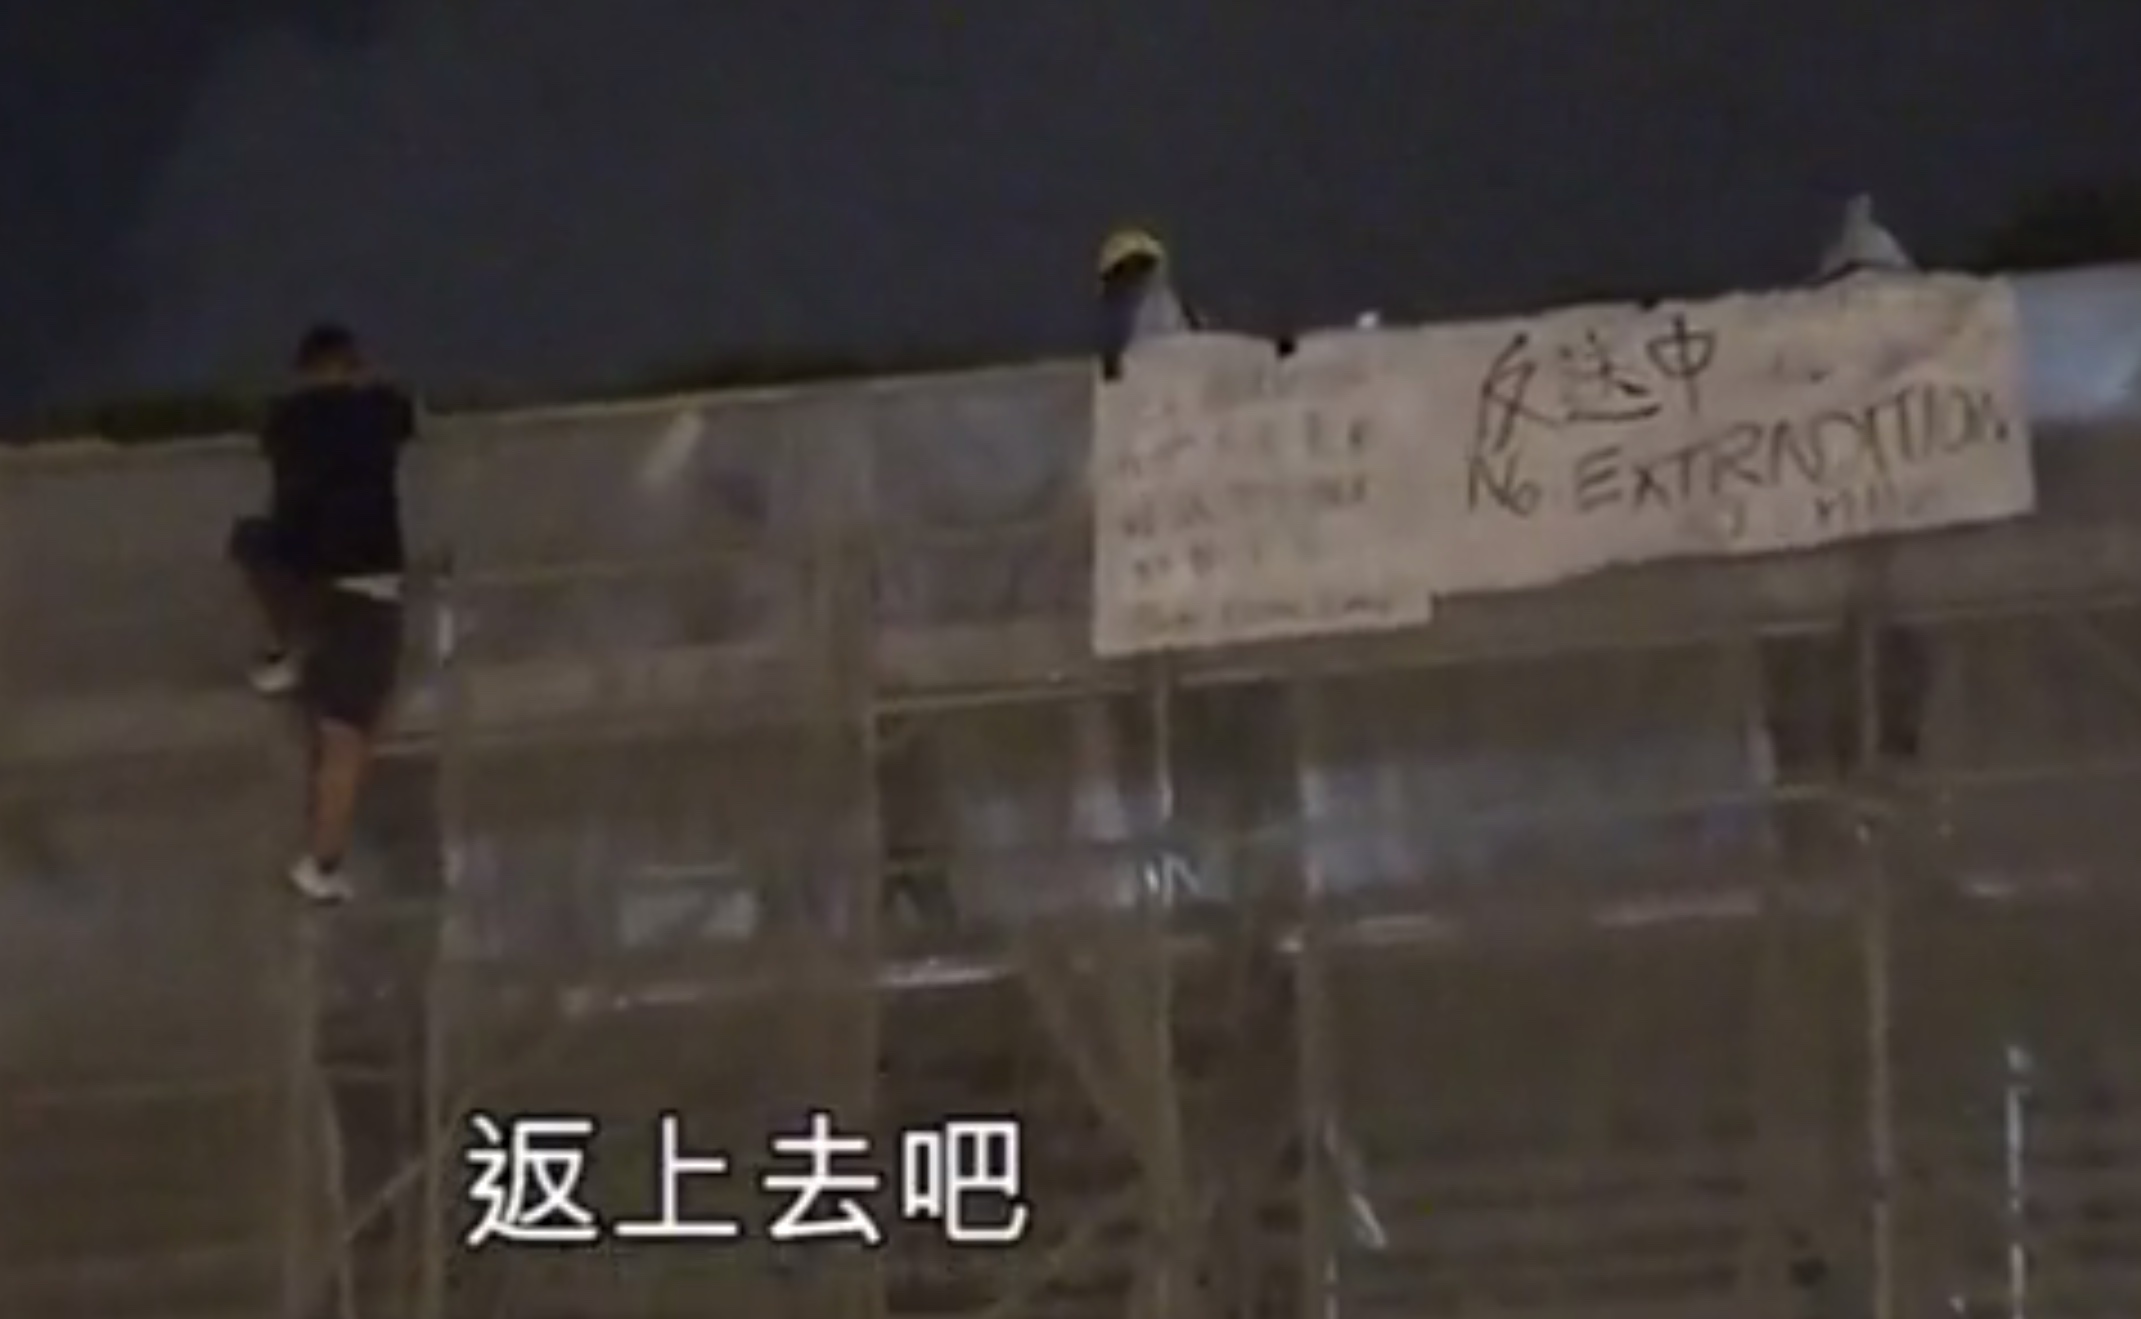 An anti-extradition bill protester clings to some scaffolding outside Pacific Place shortly before falling to his death. Screengrab via Apple Daily video.